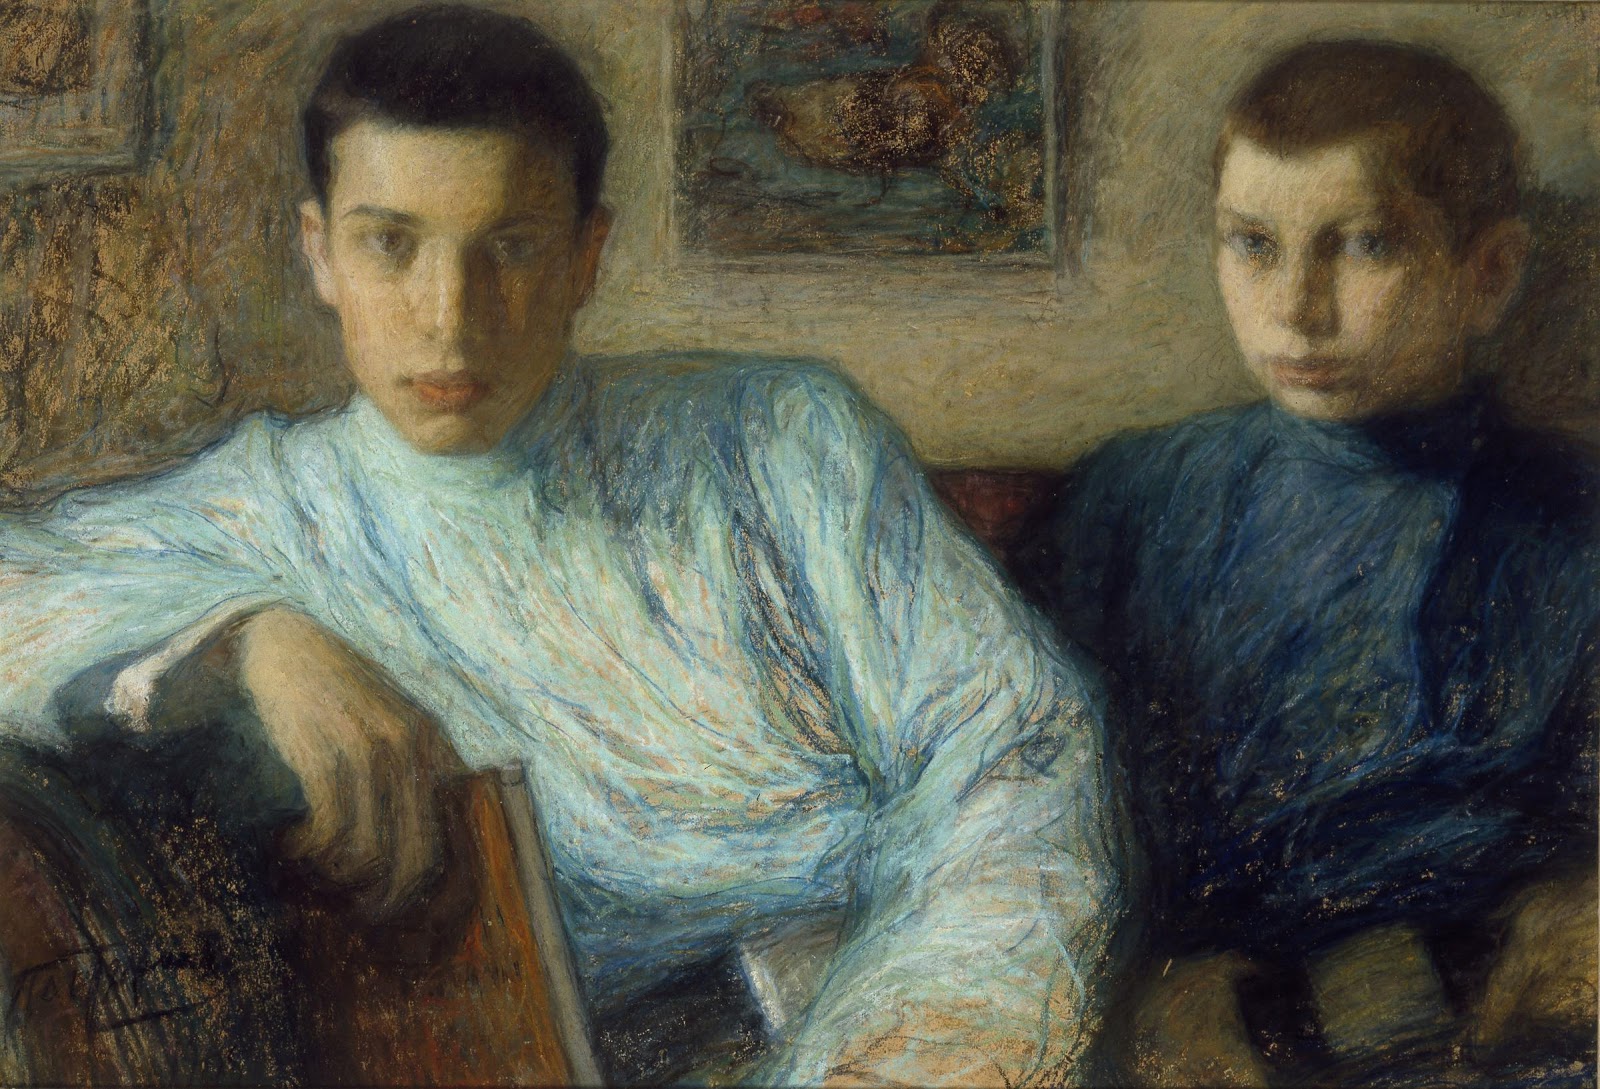 Boris Pasternak (left) with his brother Alexander. Painting by their father, Leonid Pasternak